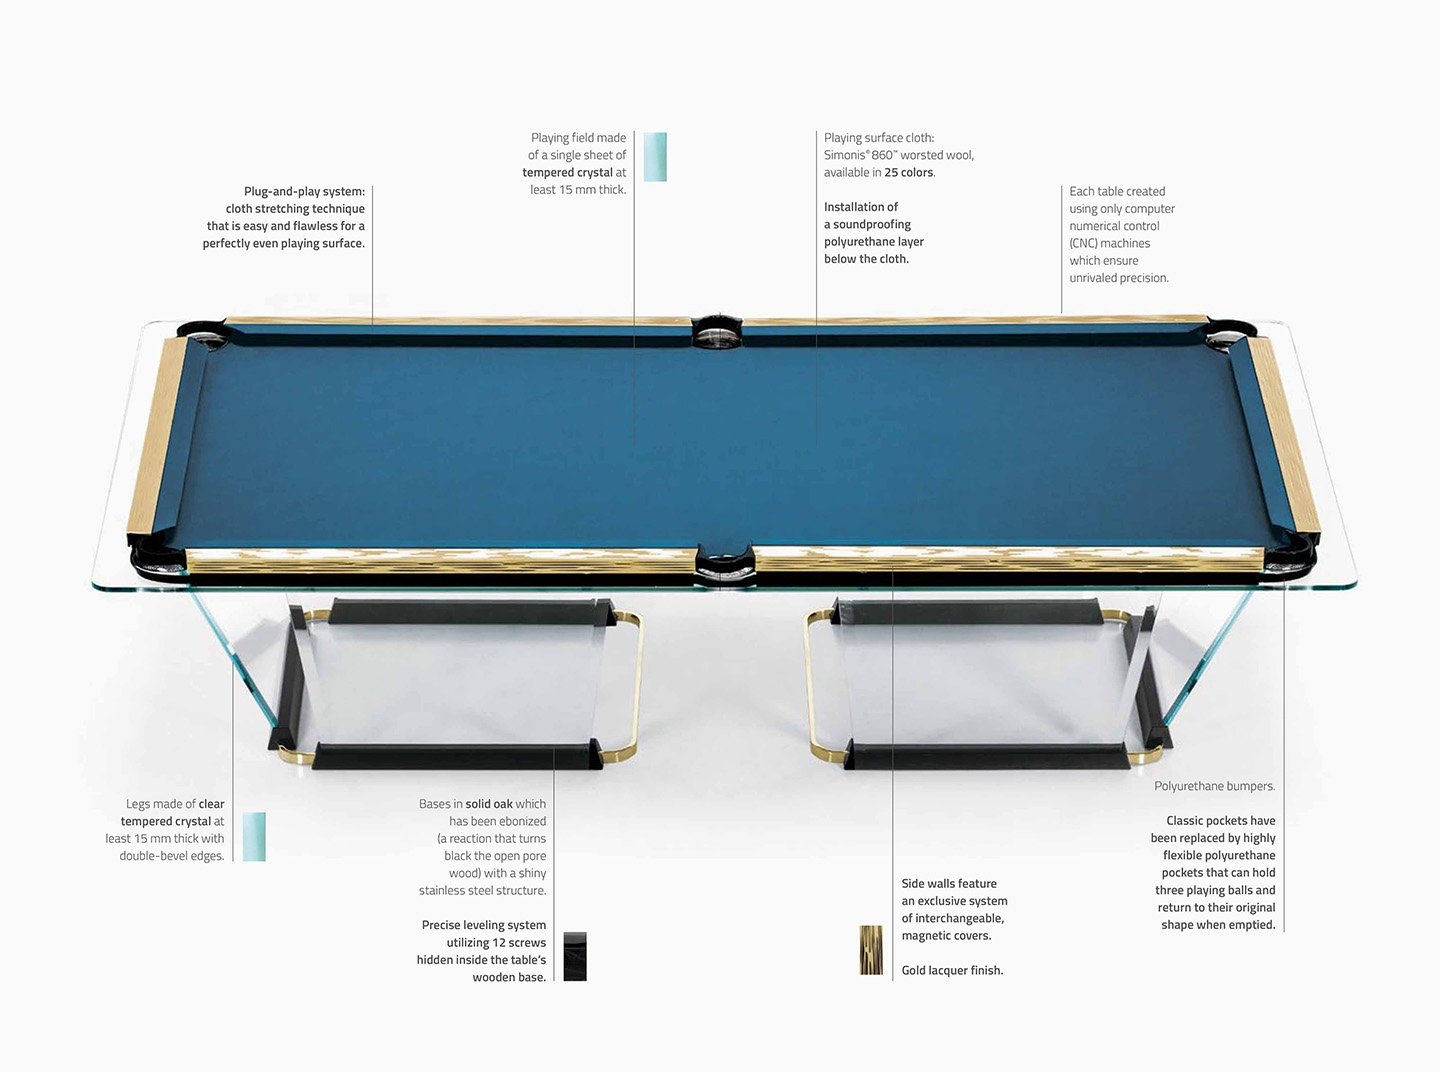 Teckell T1 Gold Edition Crystal Pool Table specs